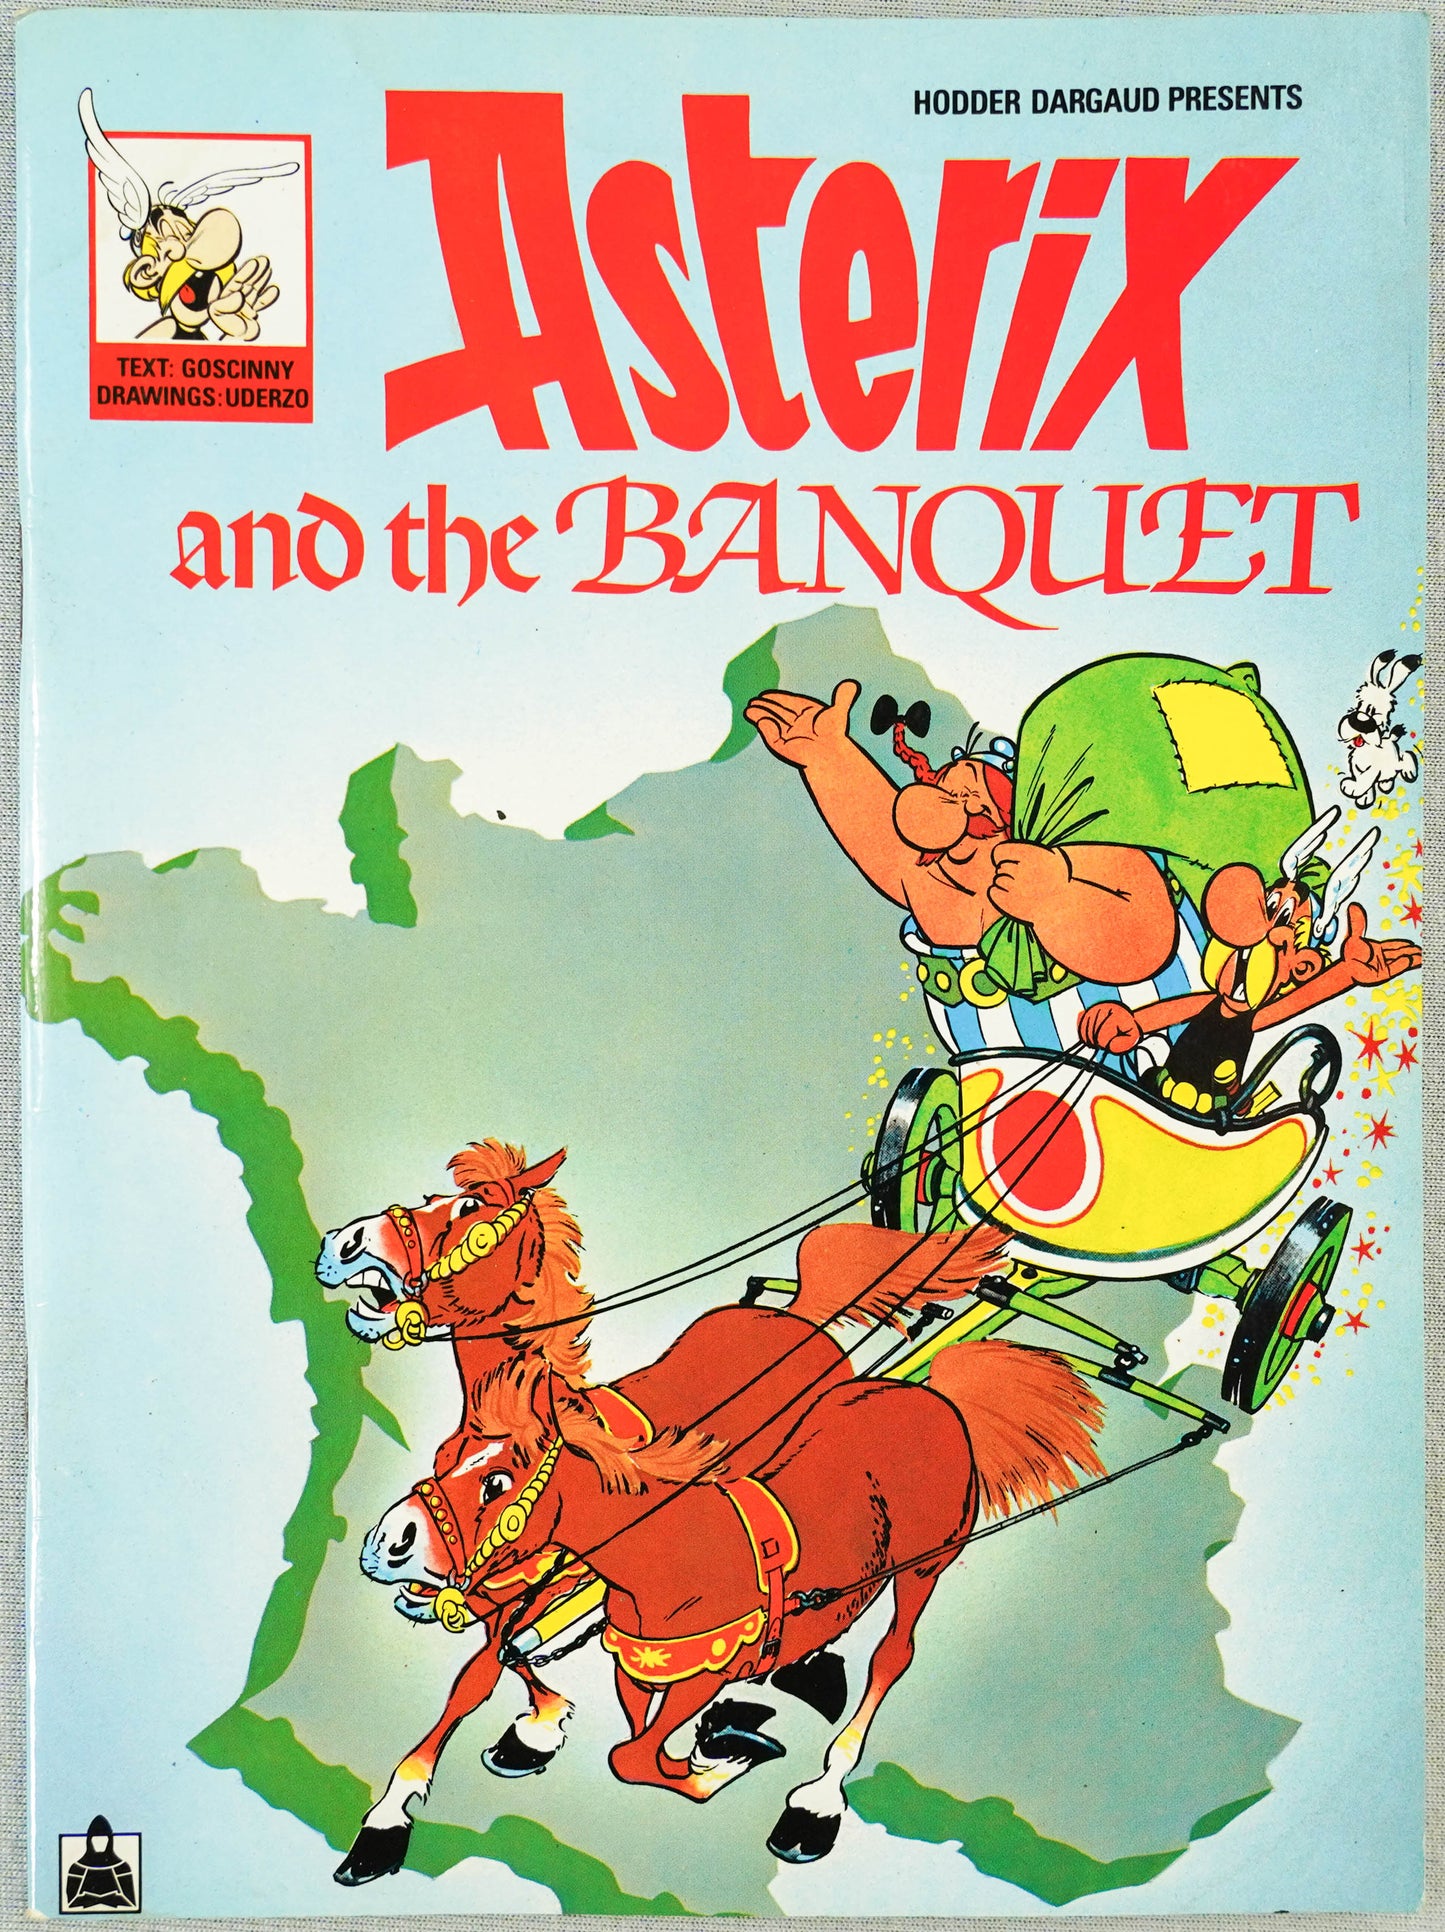 Asterix and the Banquet Vintage Mini A5 Asterix Book UK Paperback Edition Uderzo